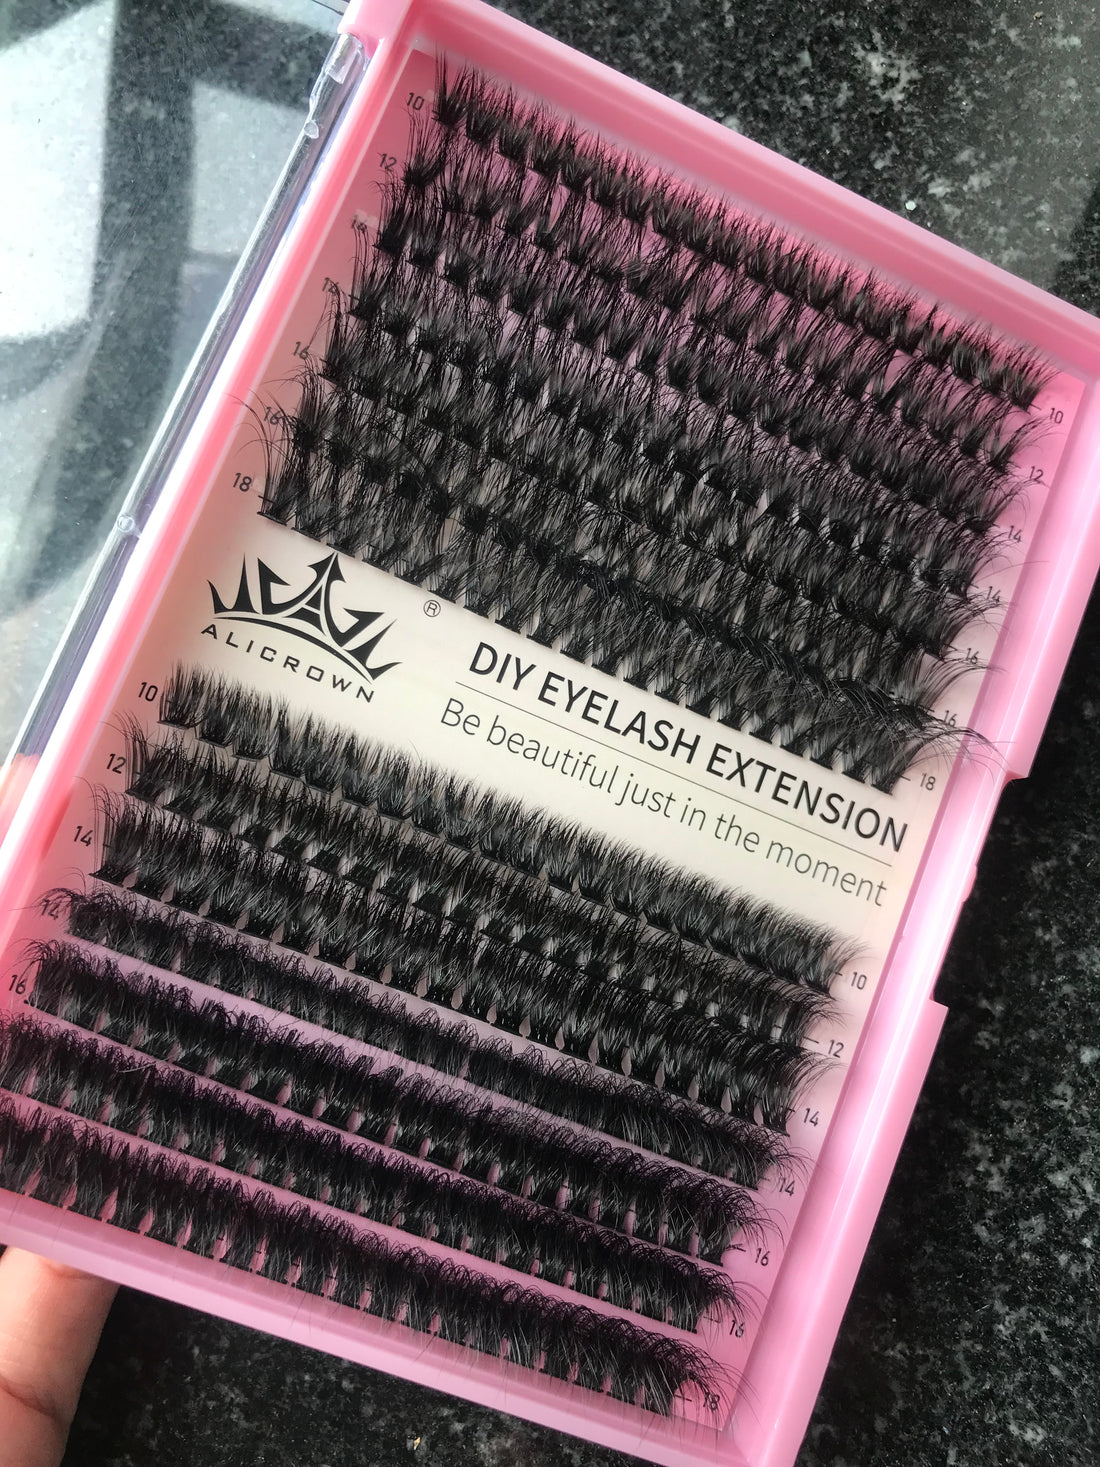 $10.90 fro 3 trays lashes